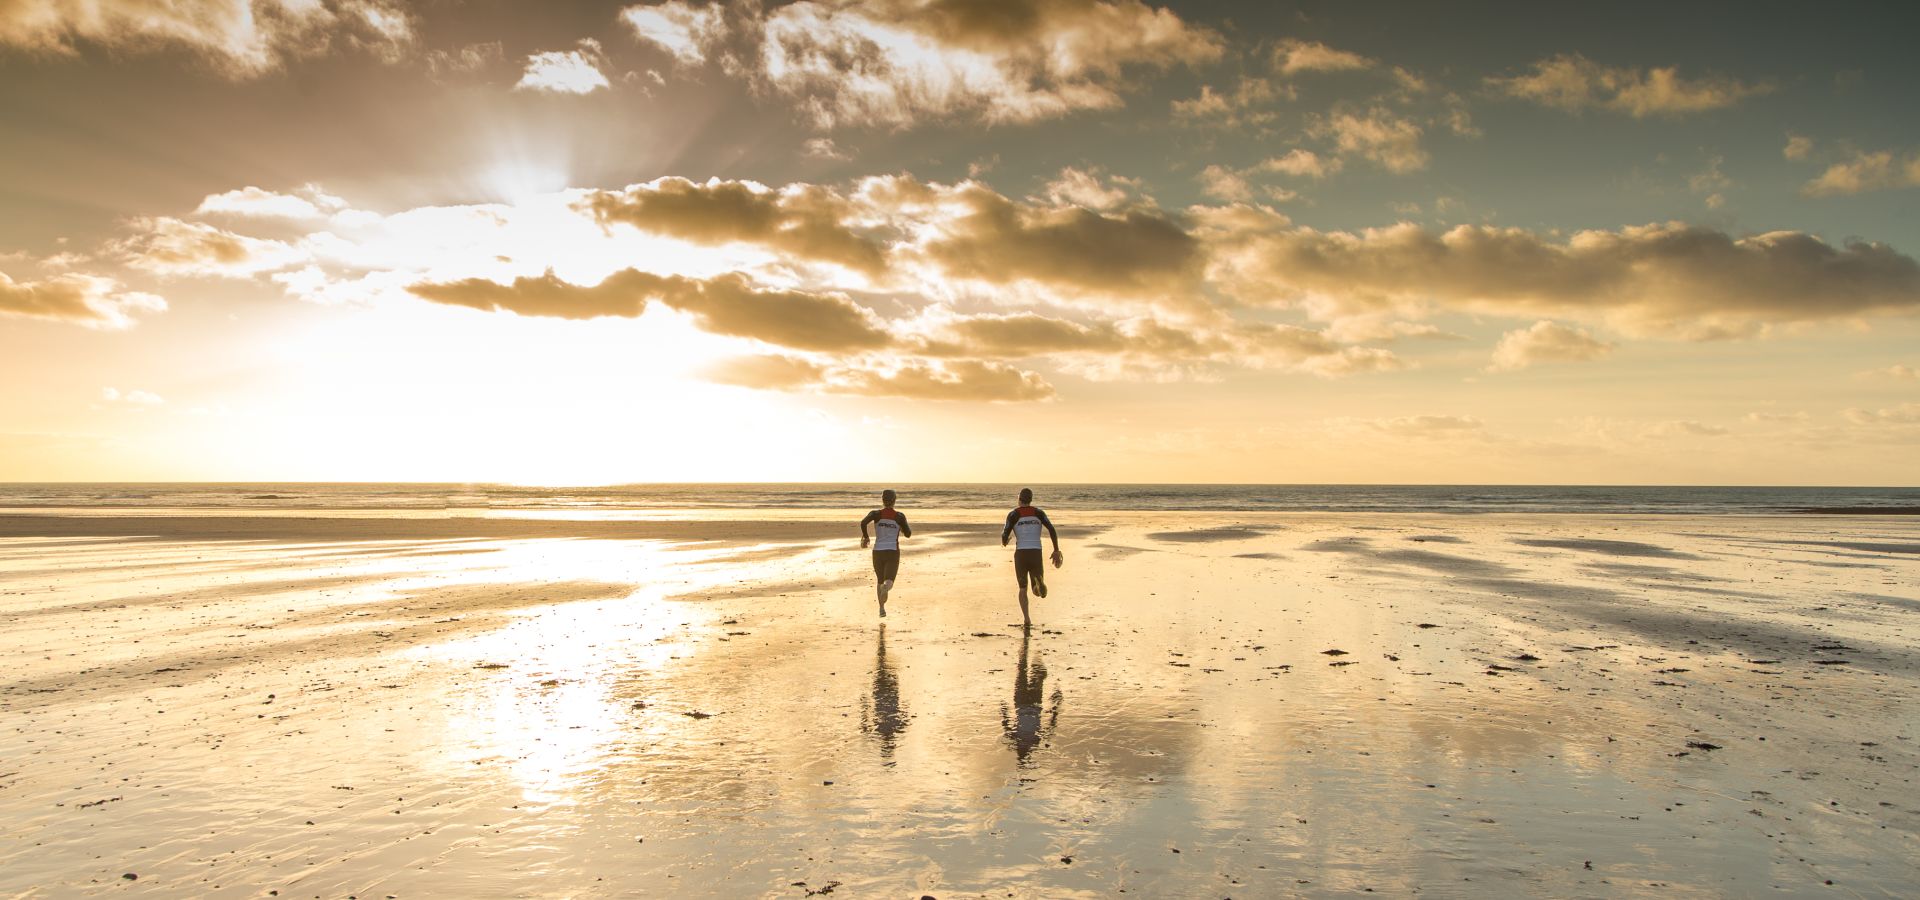 Two people running on the beach towards the sea at sunset